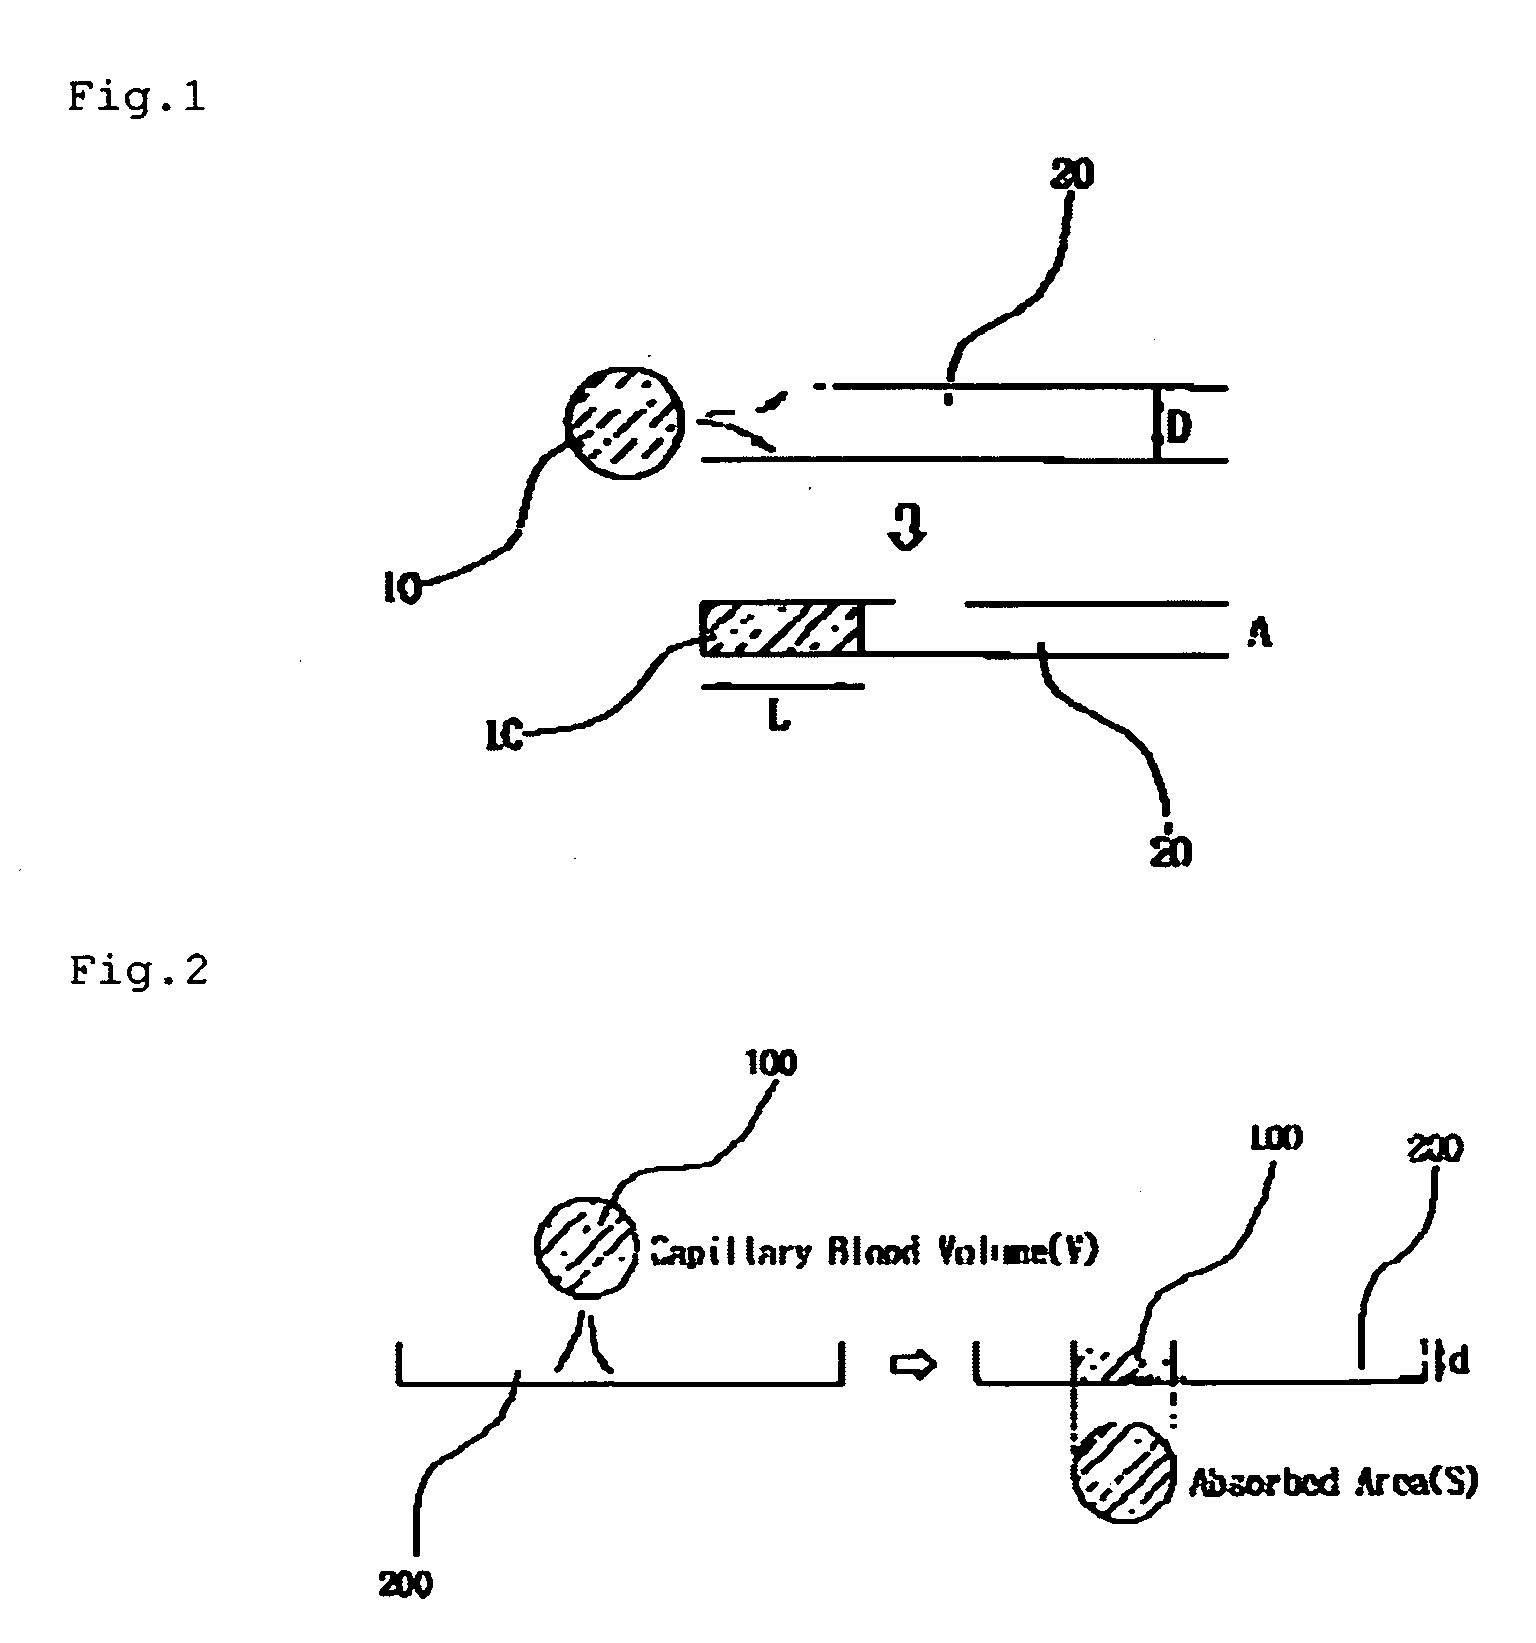 Method and system for accurately measuring very small volume of blood